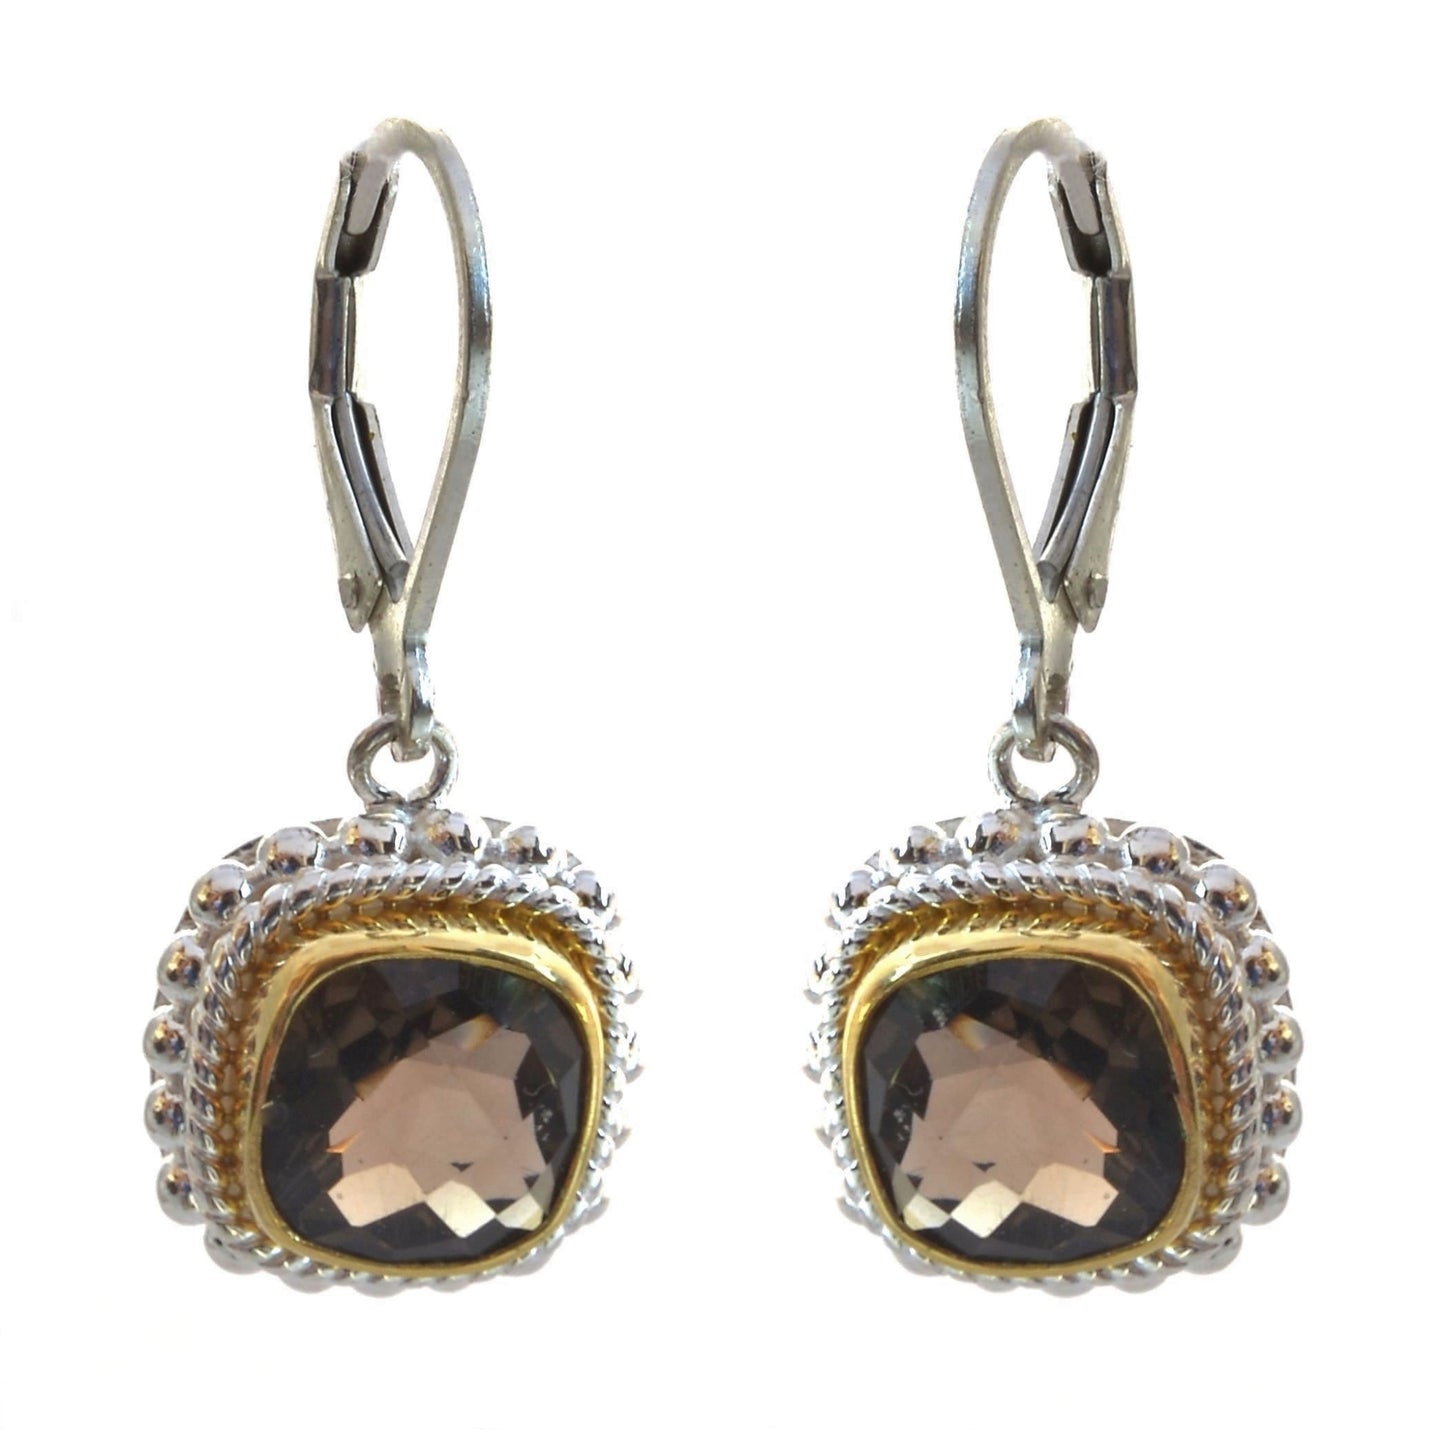 Silver and gold earrings with smoky topaz stones.